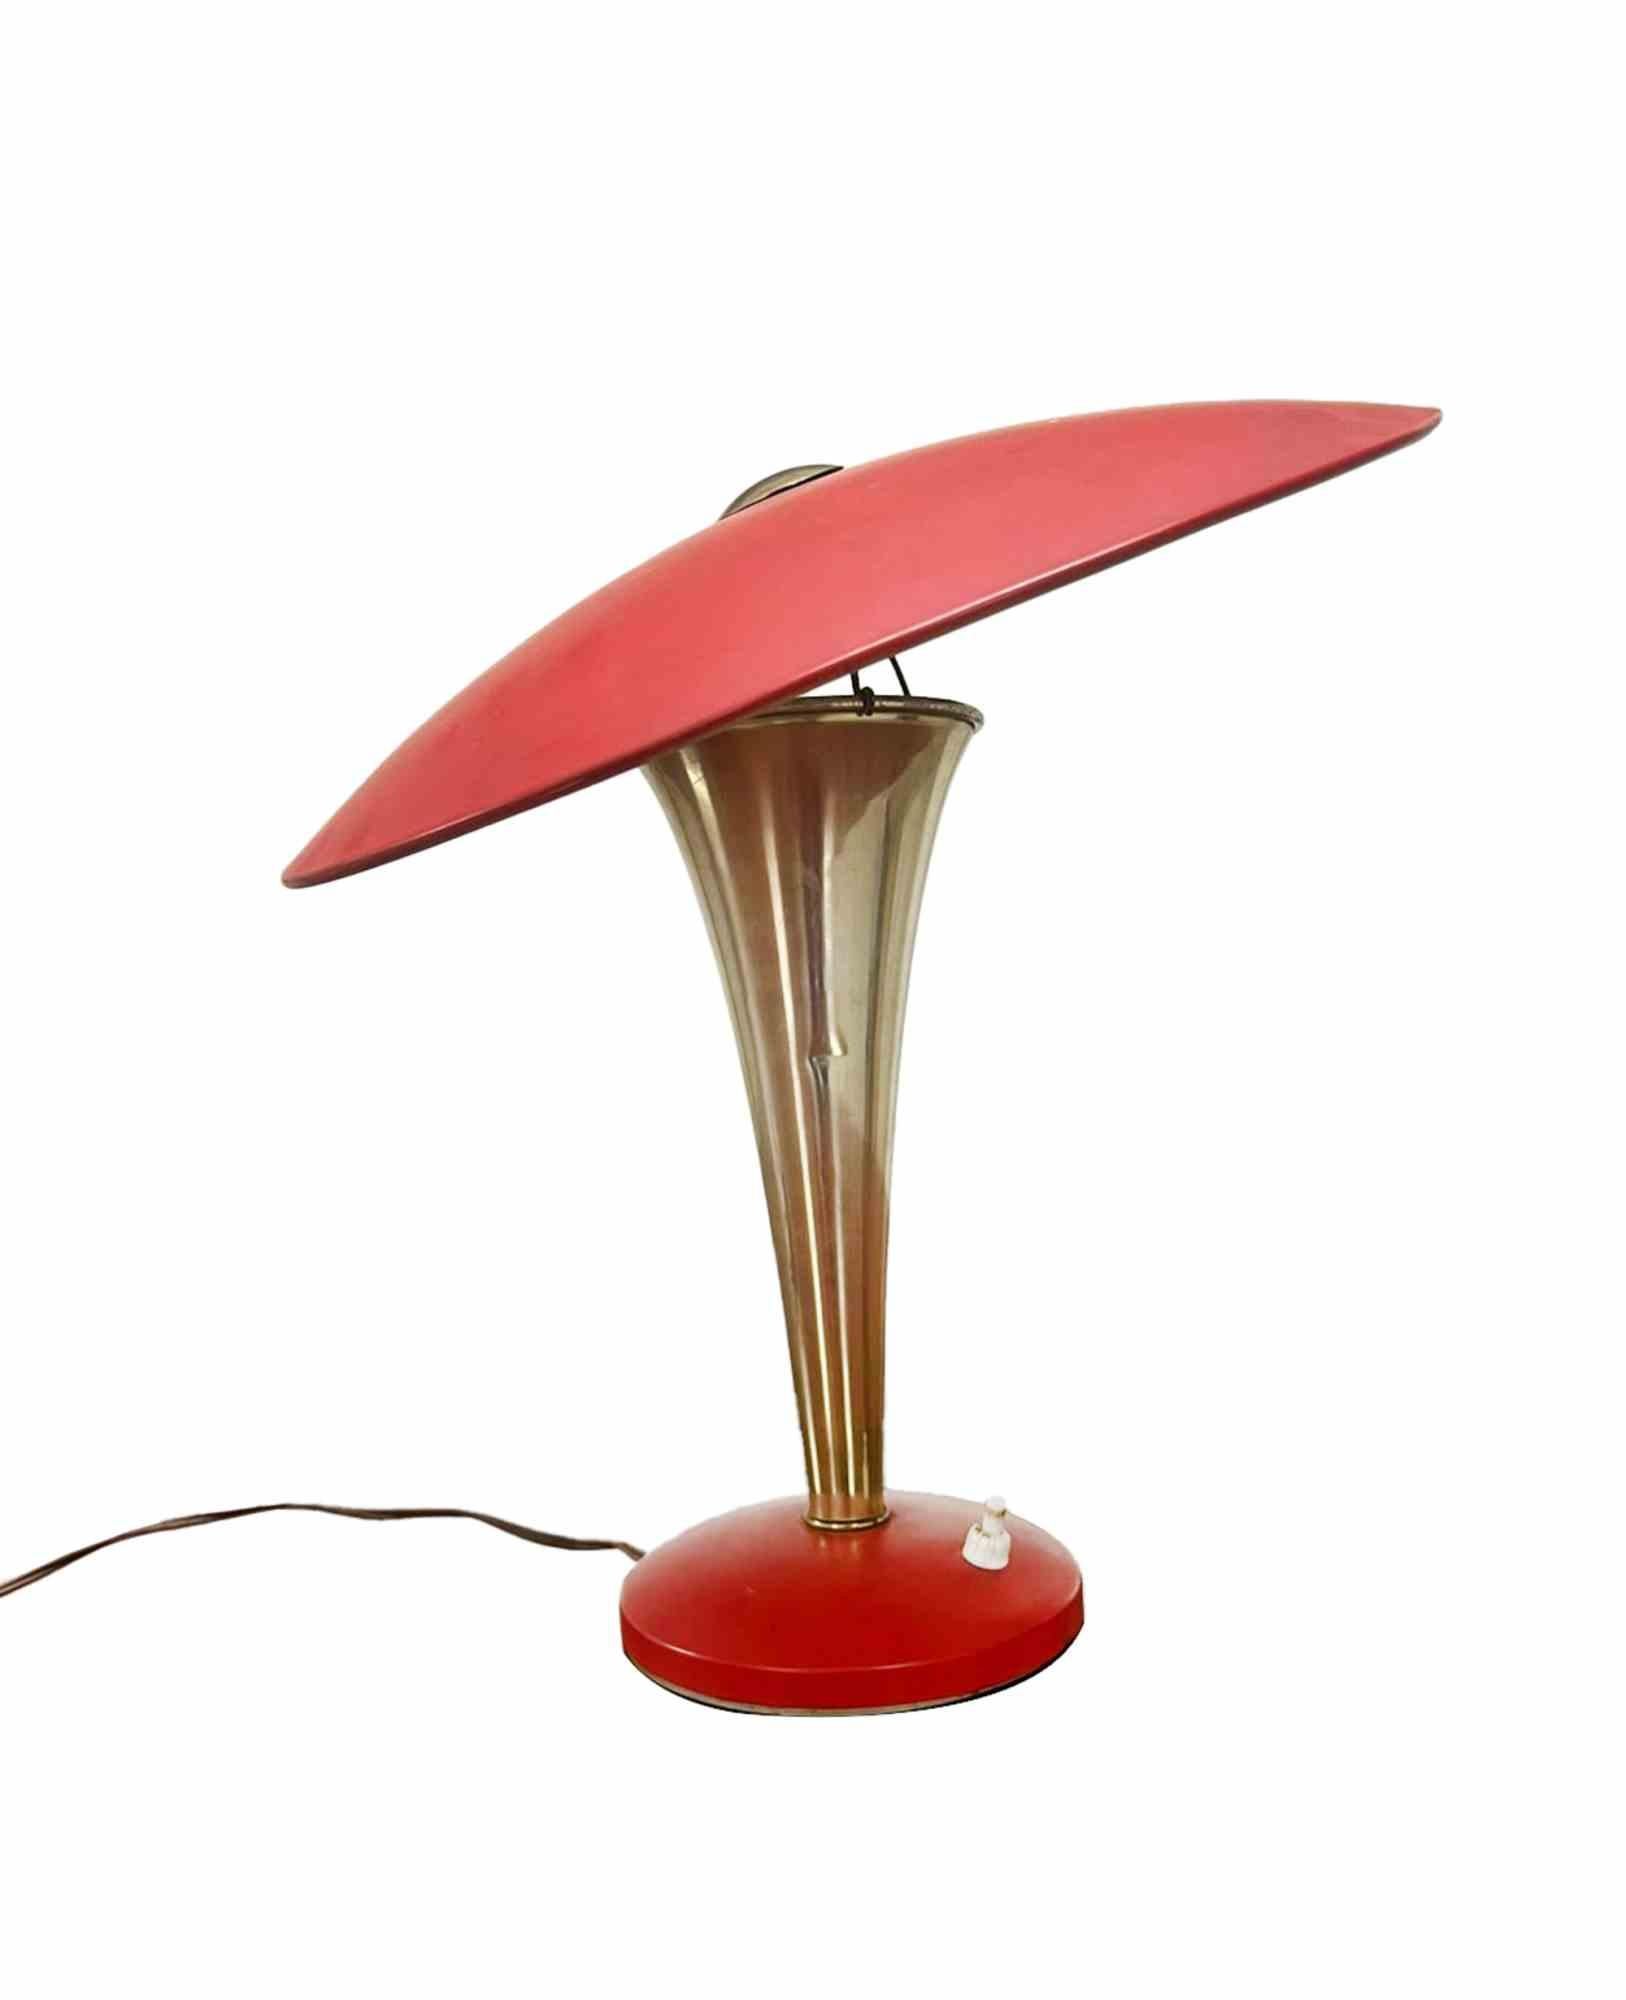 Italian Vintage Adjustable Table Lamp by Stilnovo, Italy, 1950s For Sale